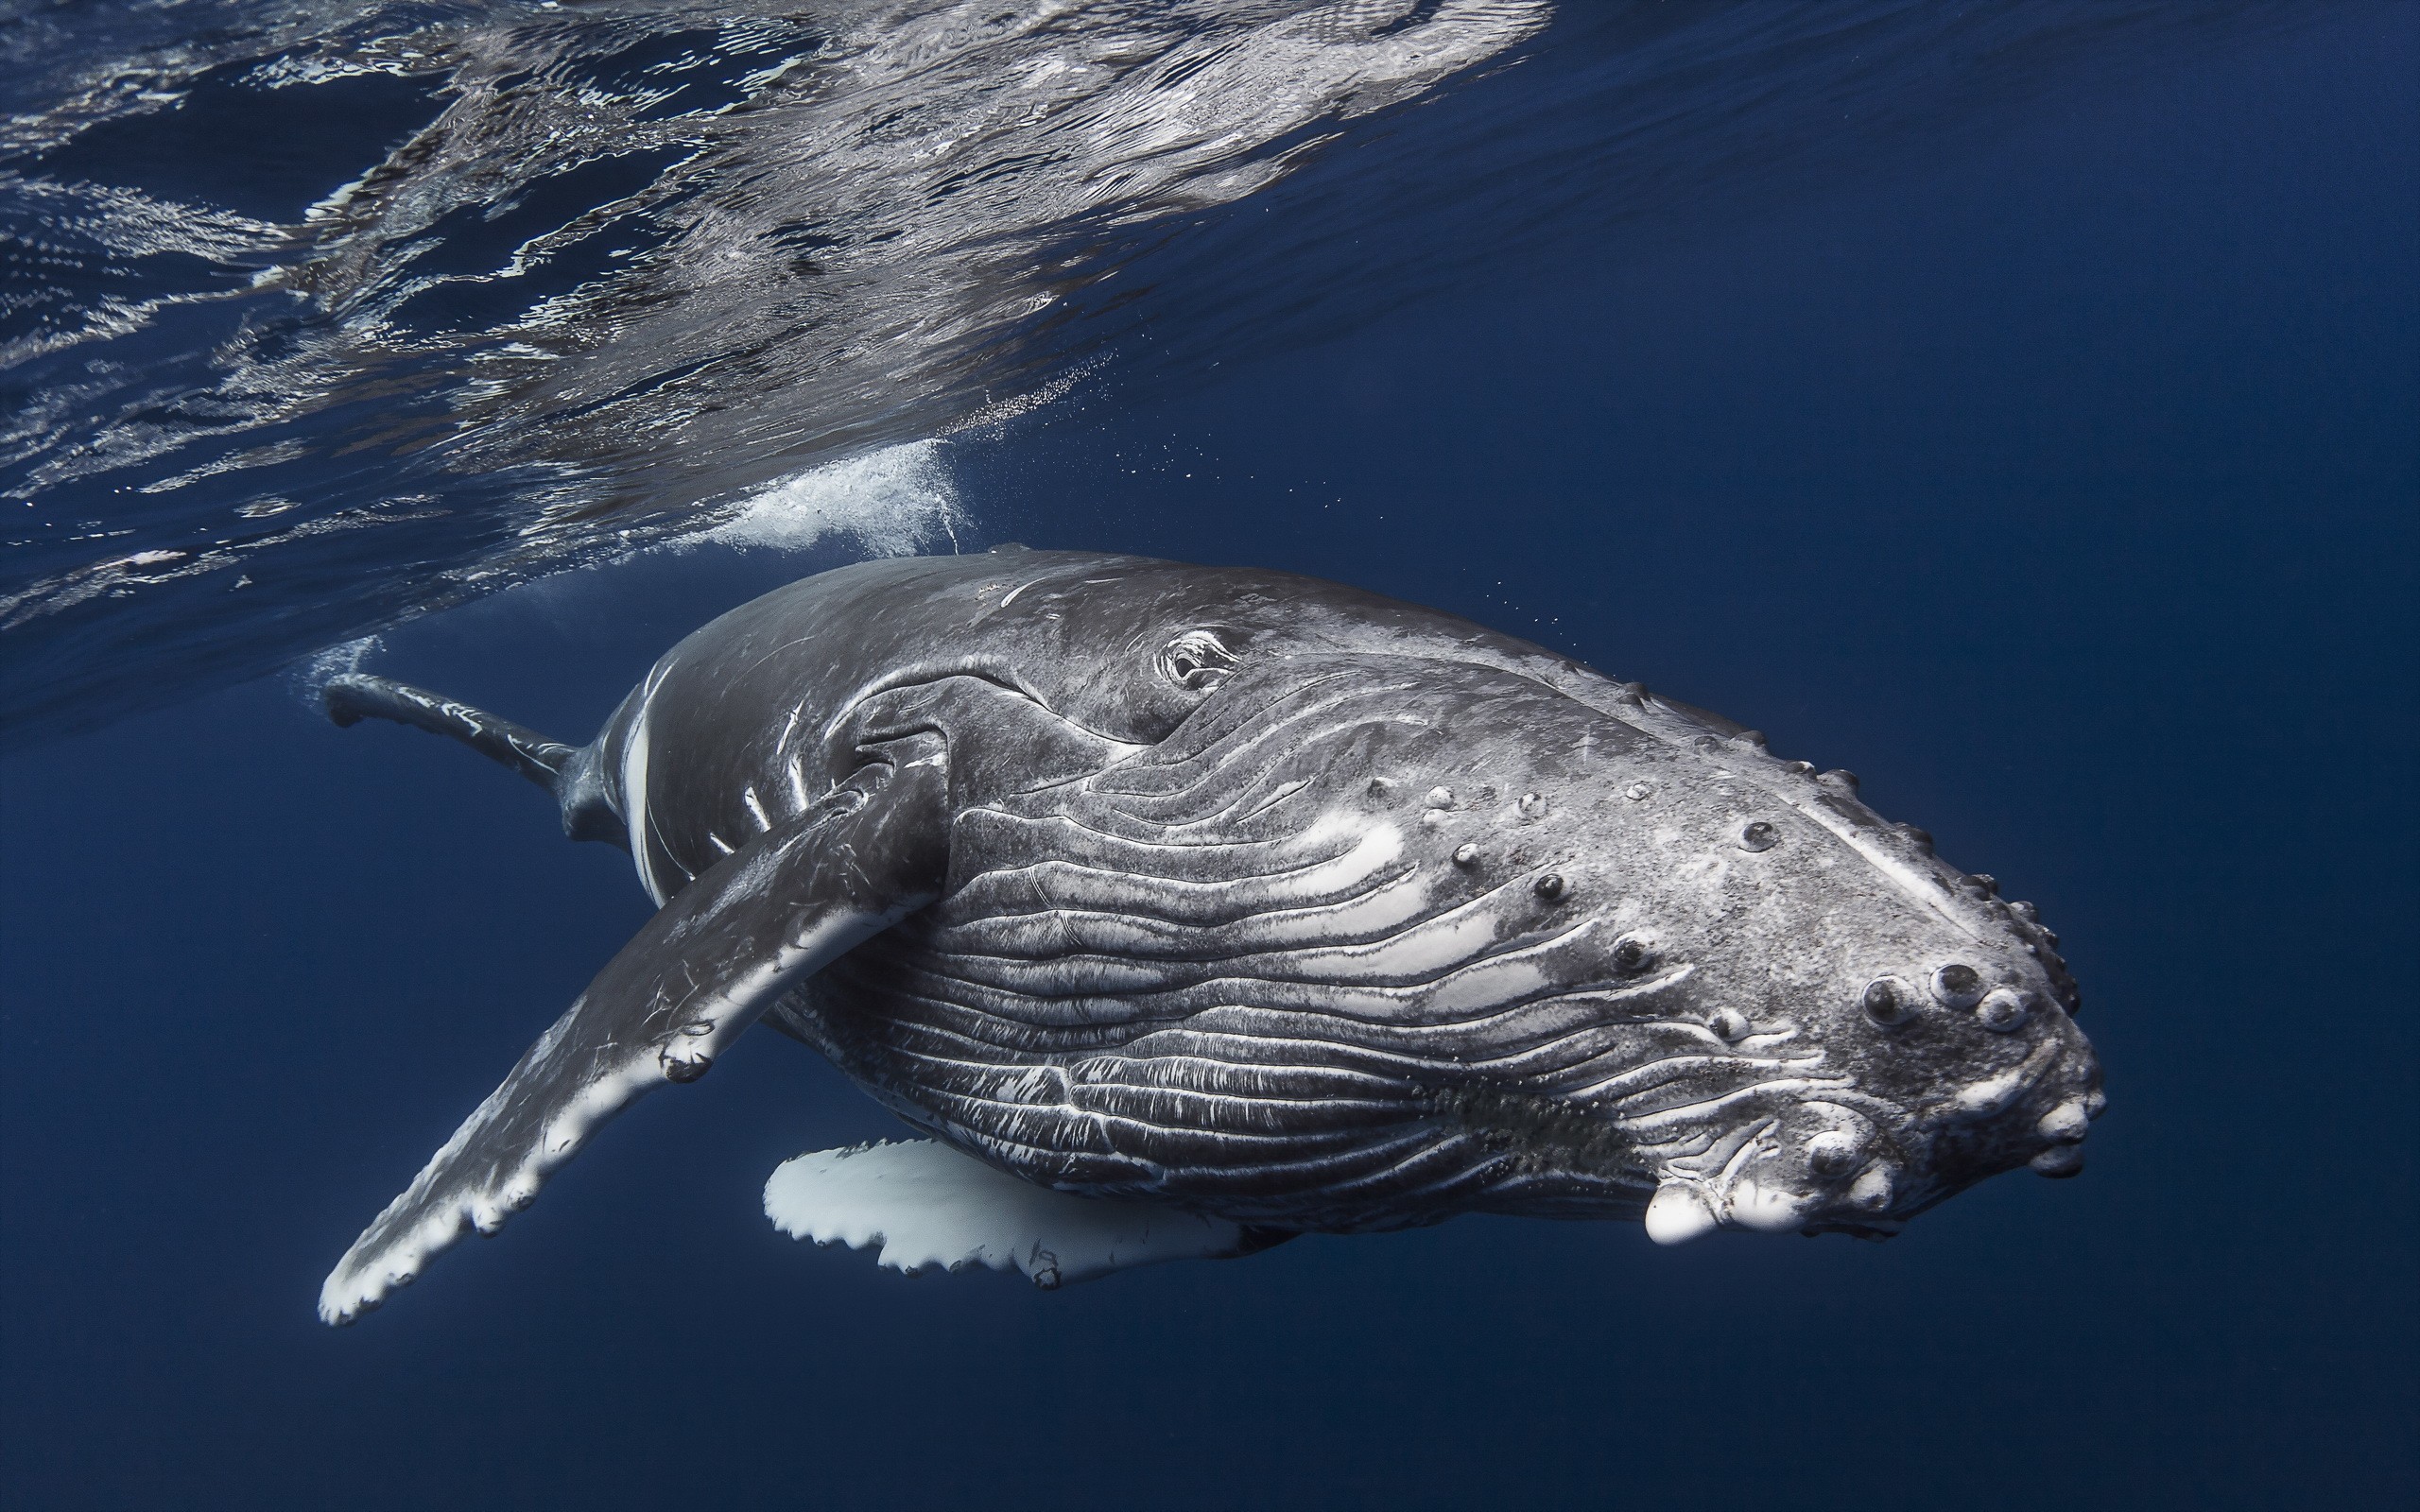 Underwater Whale Humpback Whale 2560x1600